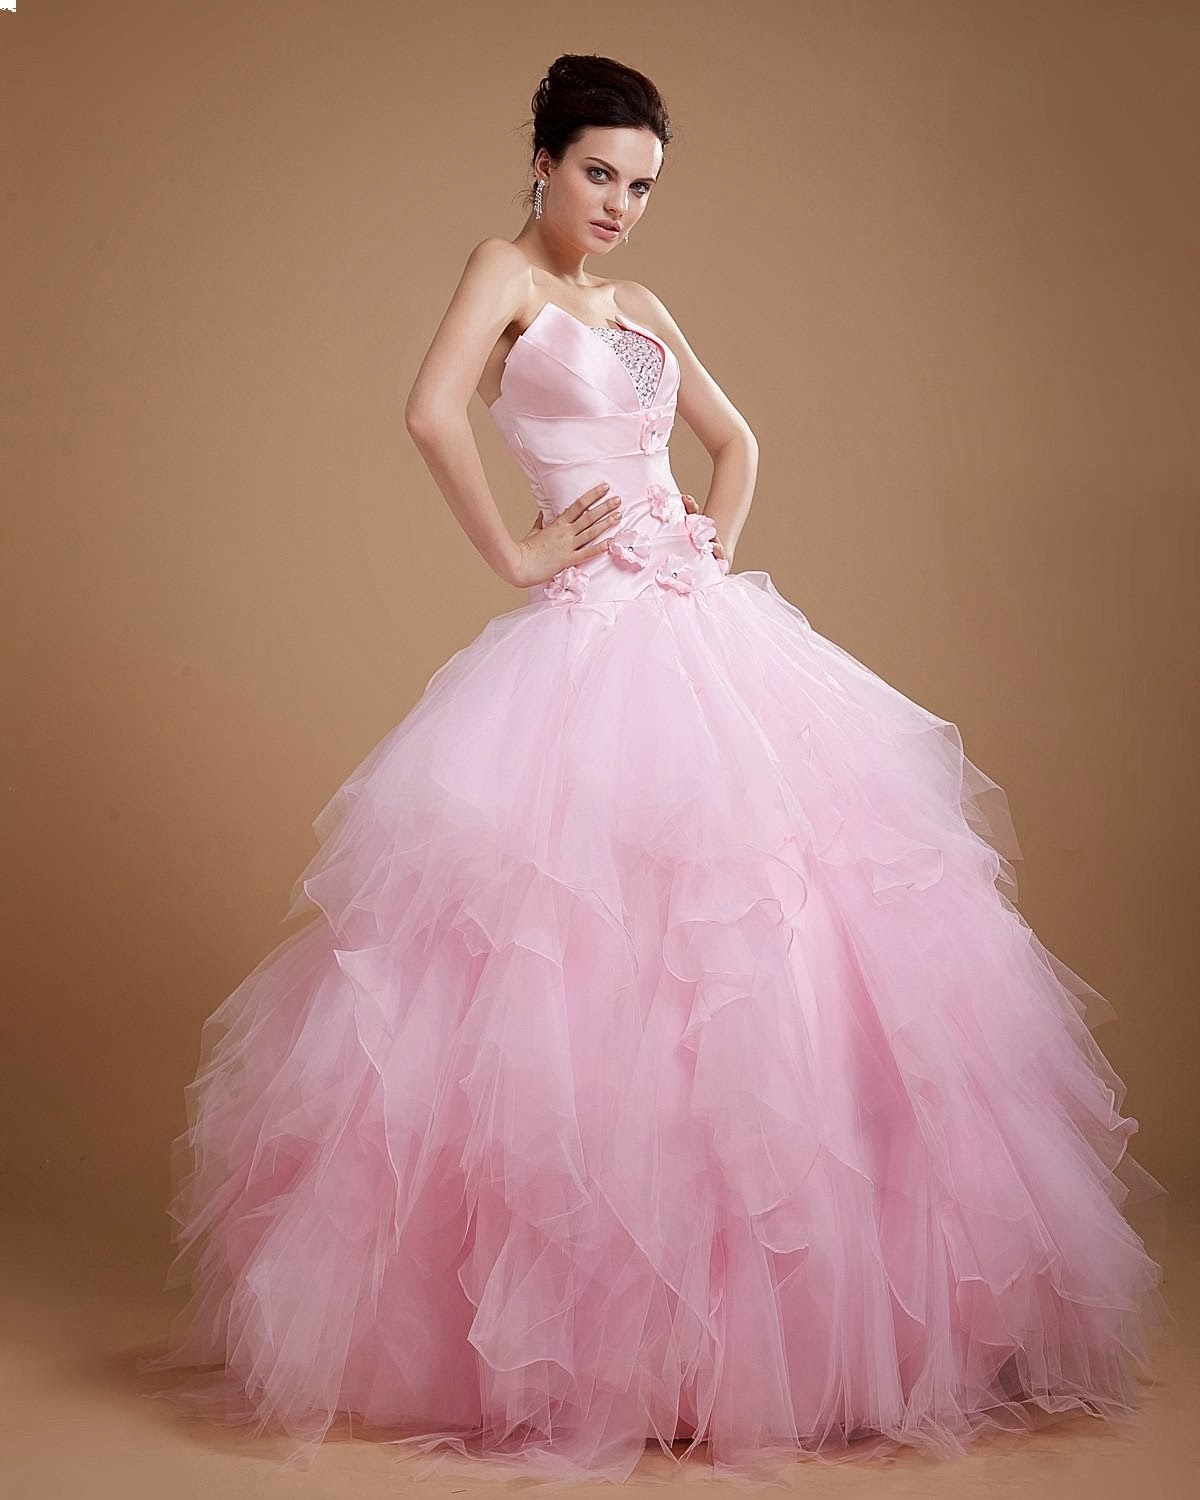 Top #3 Pink Prom Dresses Ball Gowns 2013 | Prom Dresses Gowns Fashion